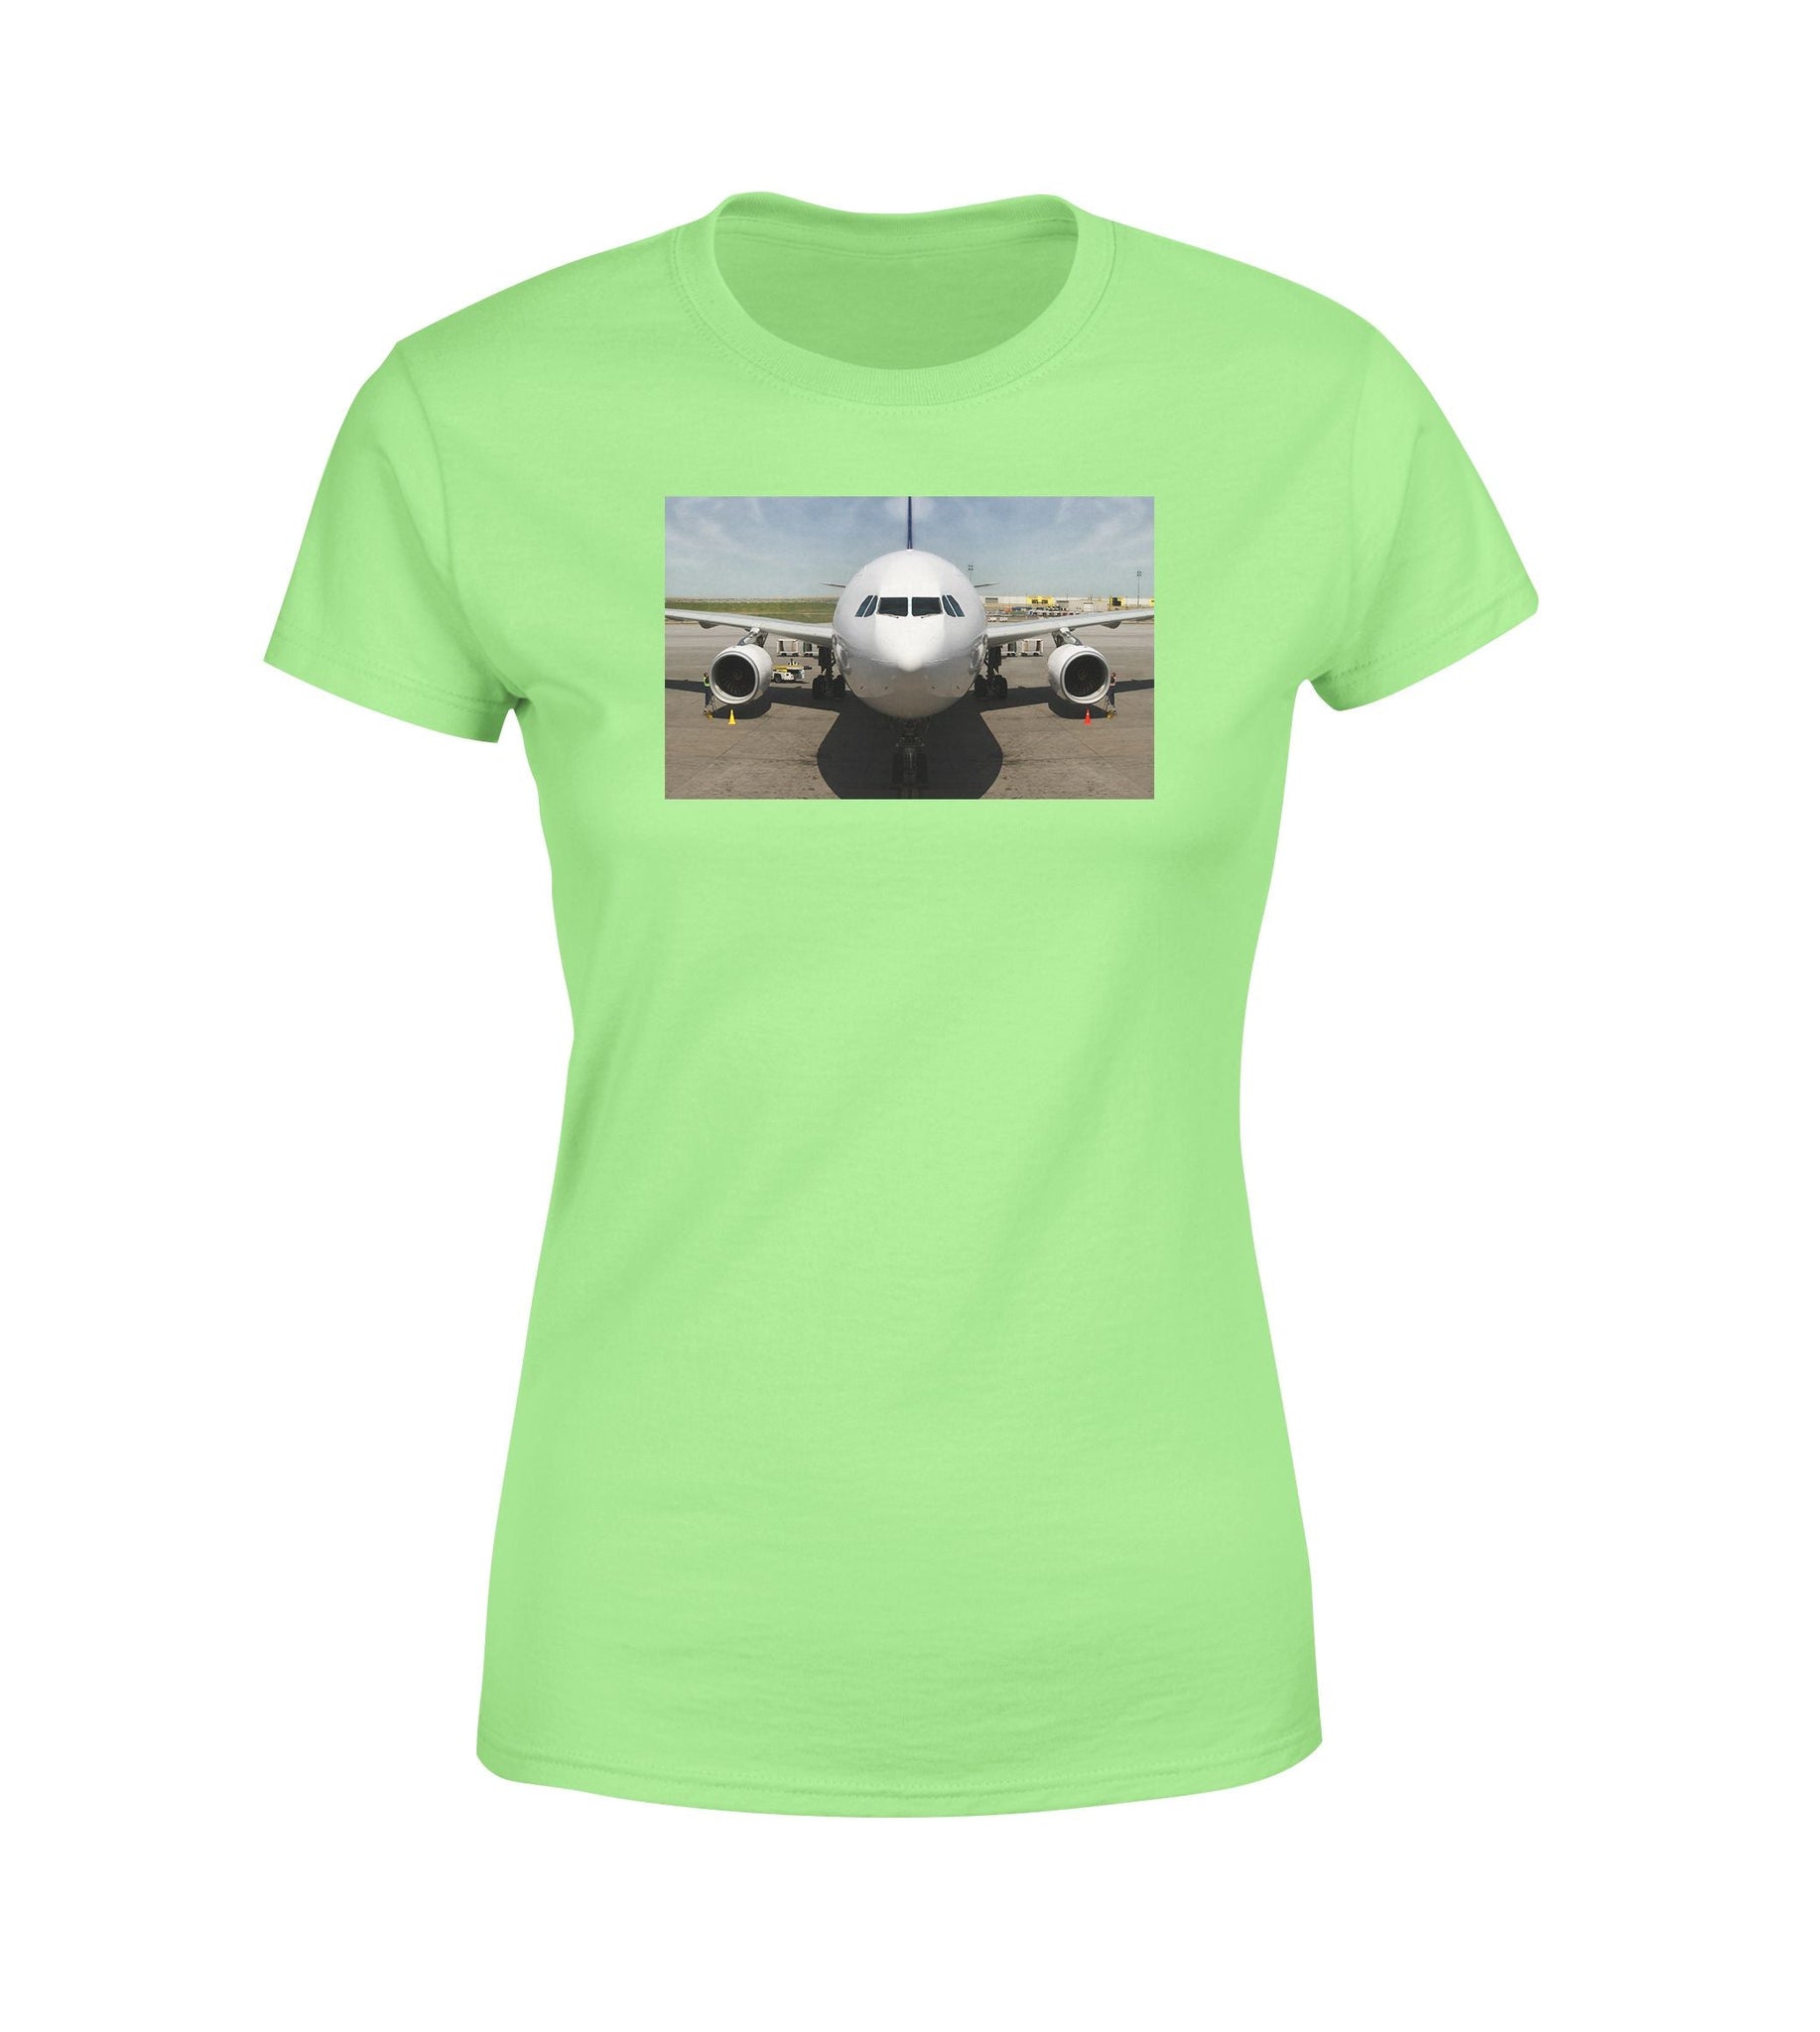 Face to Face with an Huge Airbus Designed Women T-Shirts